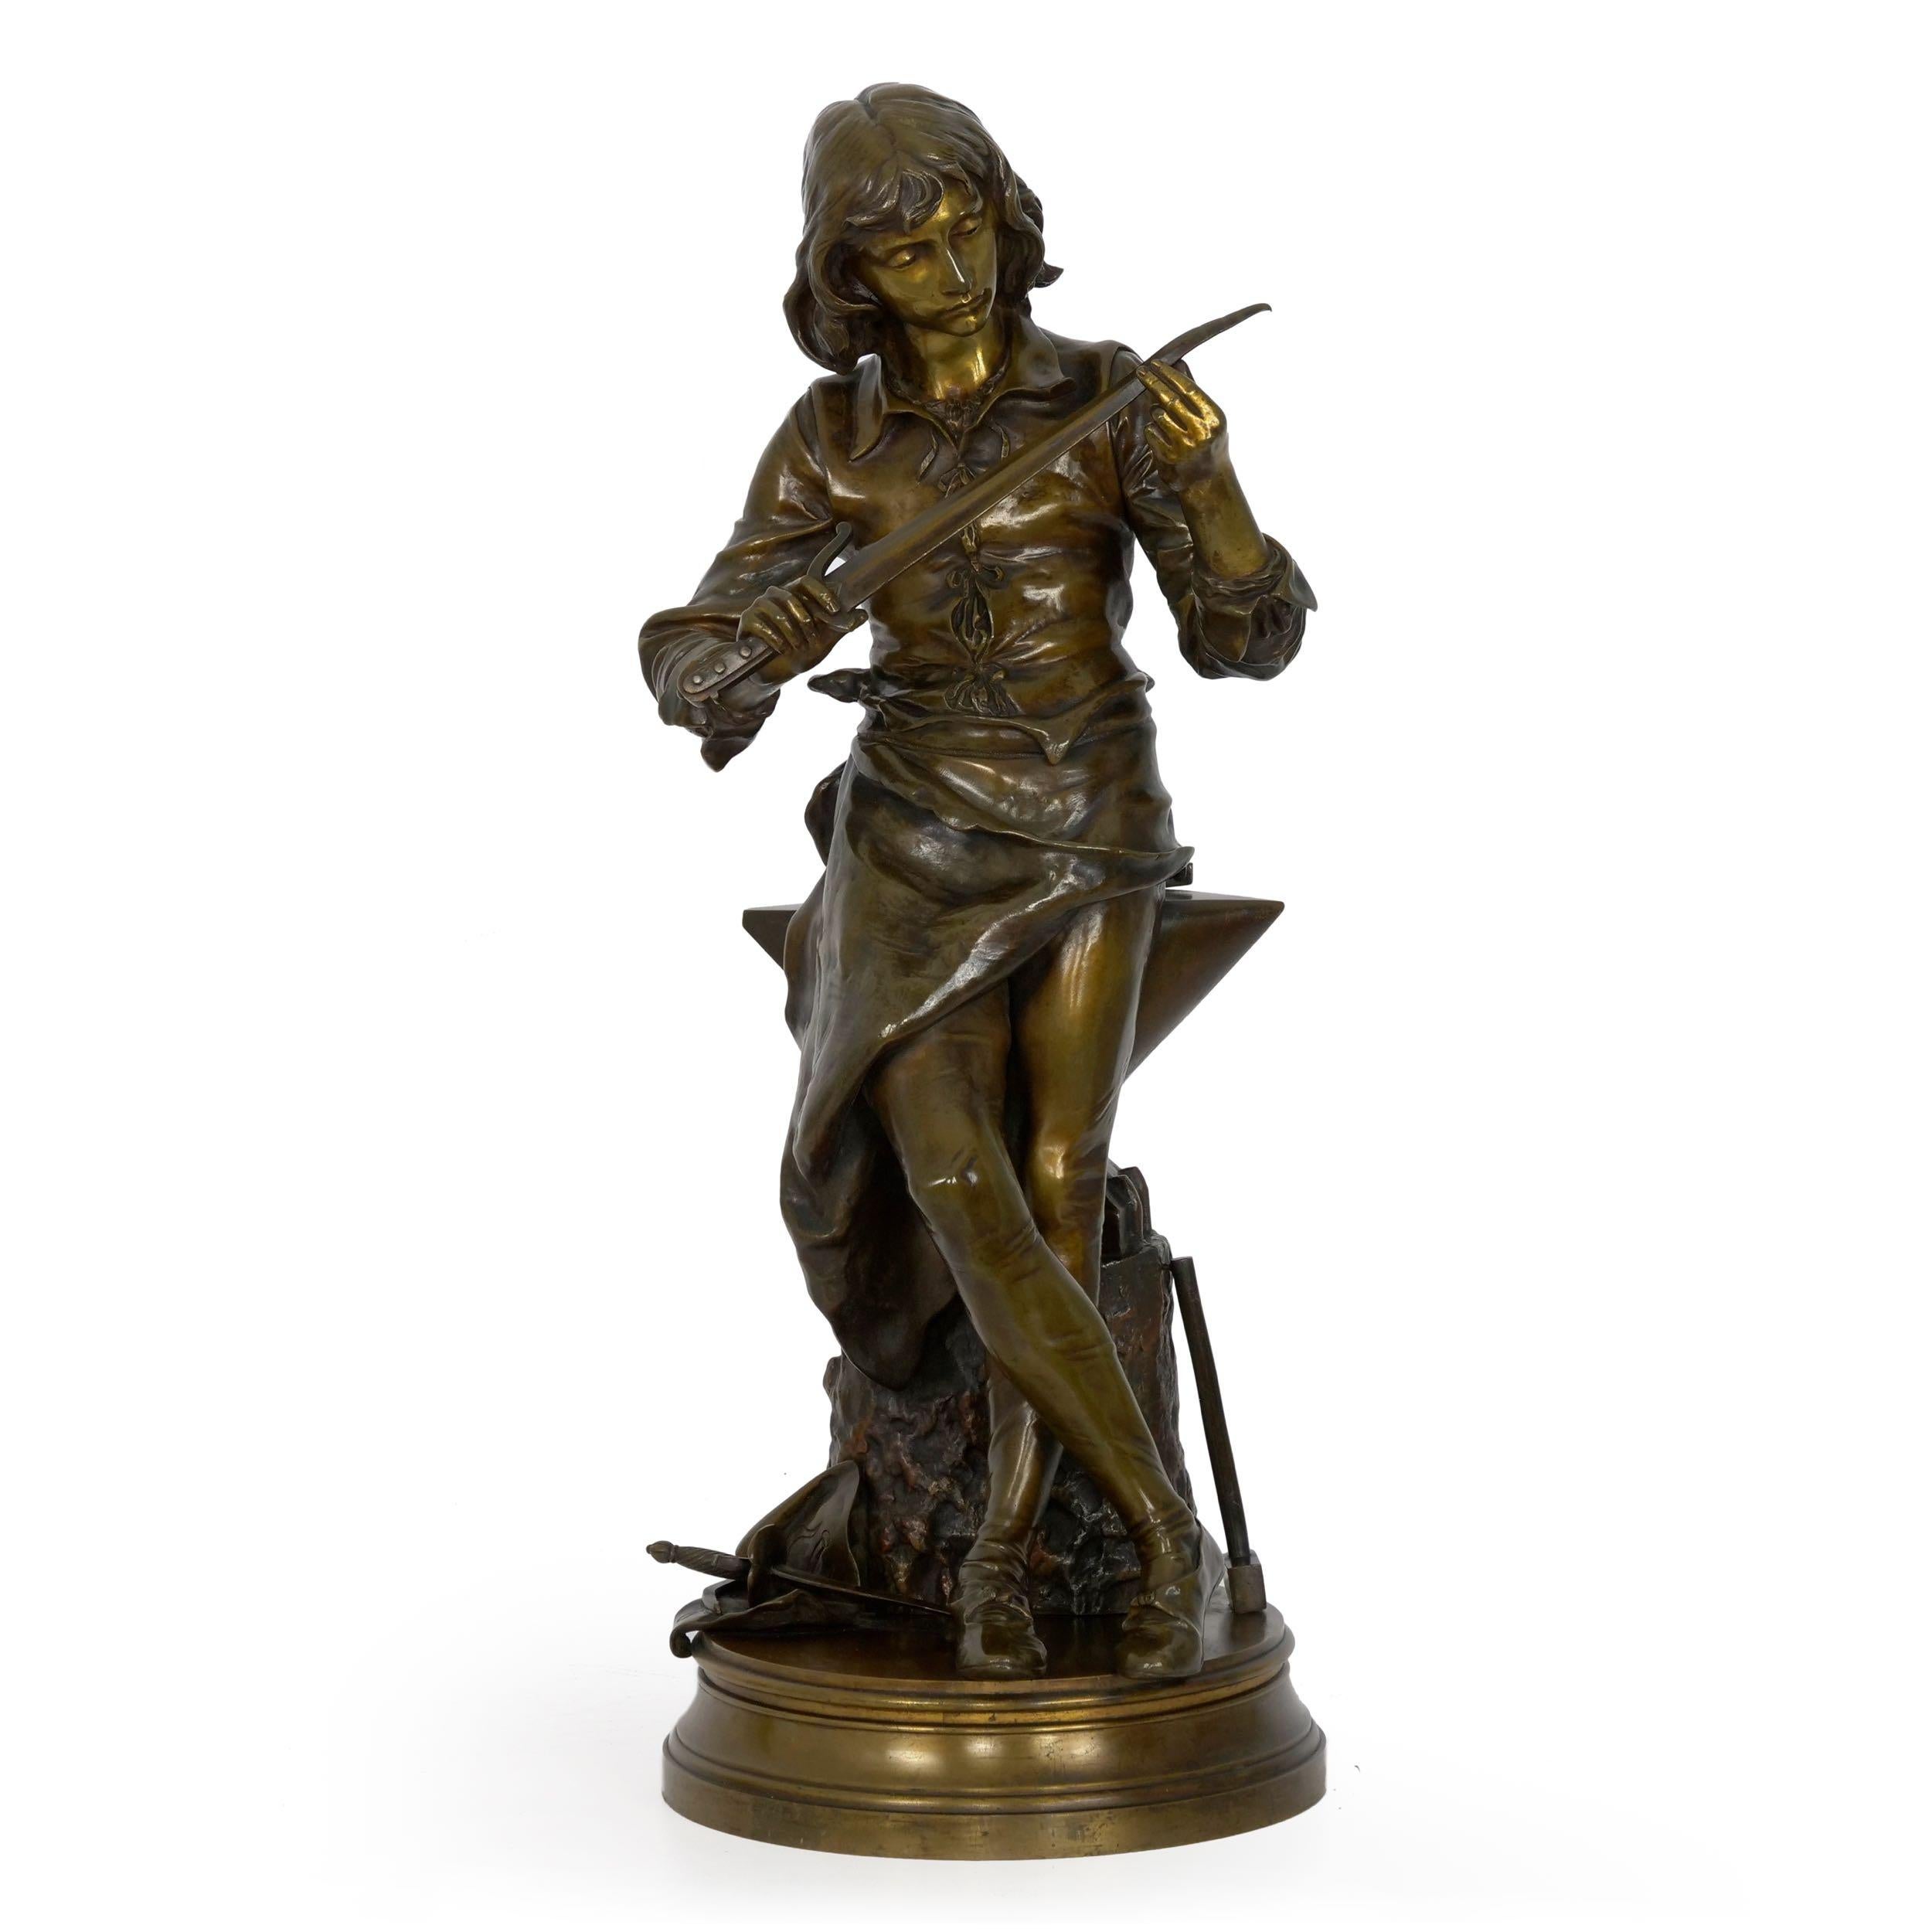 An exceedingly well-cast model of a blacksmith's apprentice assessing a damaged sword, the technical precision of the foundry work is notable. There is a complexity to the lost-wax model that extends to the patination, utilizing a nearly gold in the